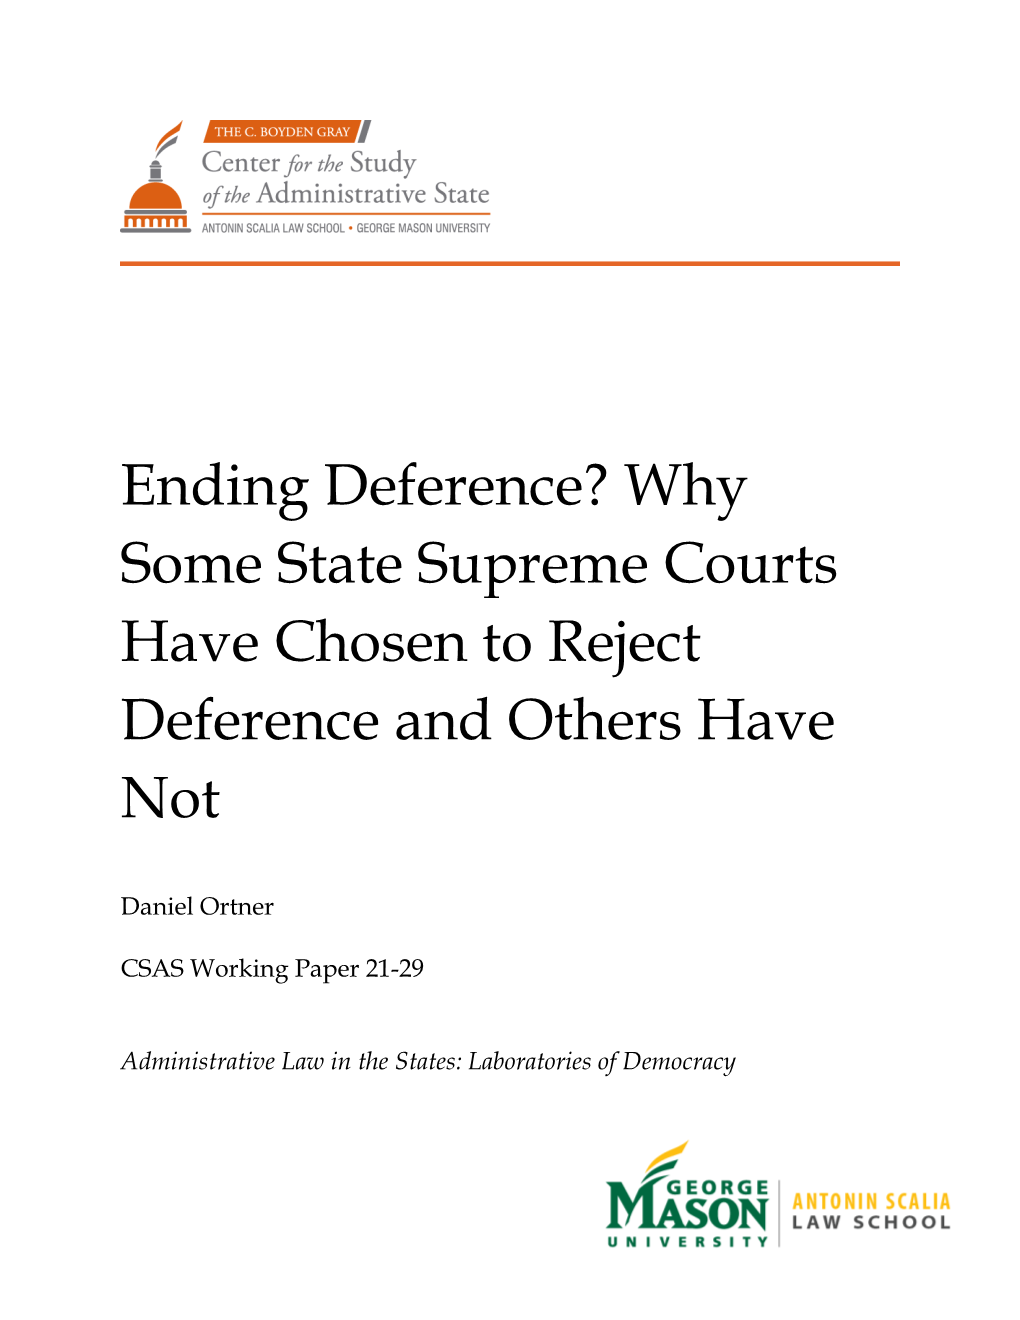 Ending Deference? Why Some State Supreme Courts Have Chosen to Reject Deference and Others Have Not